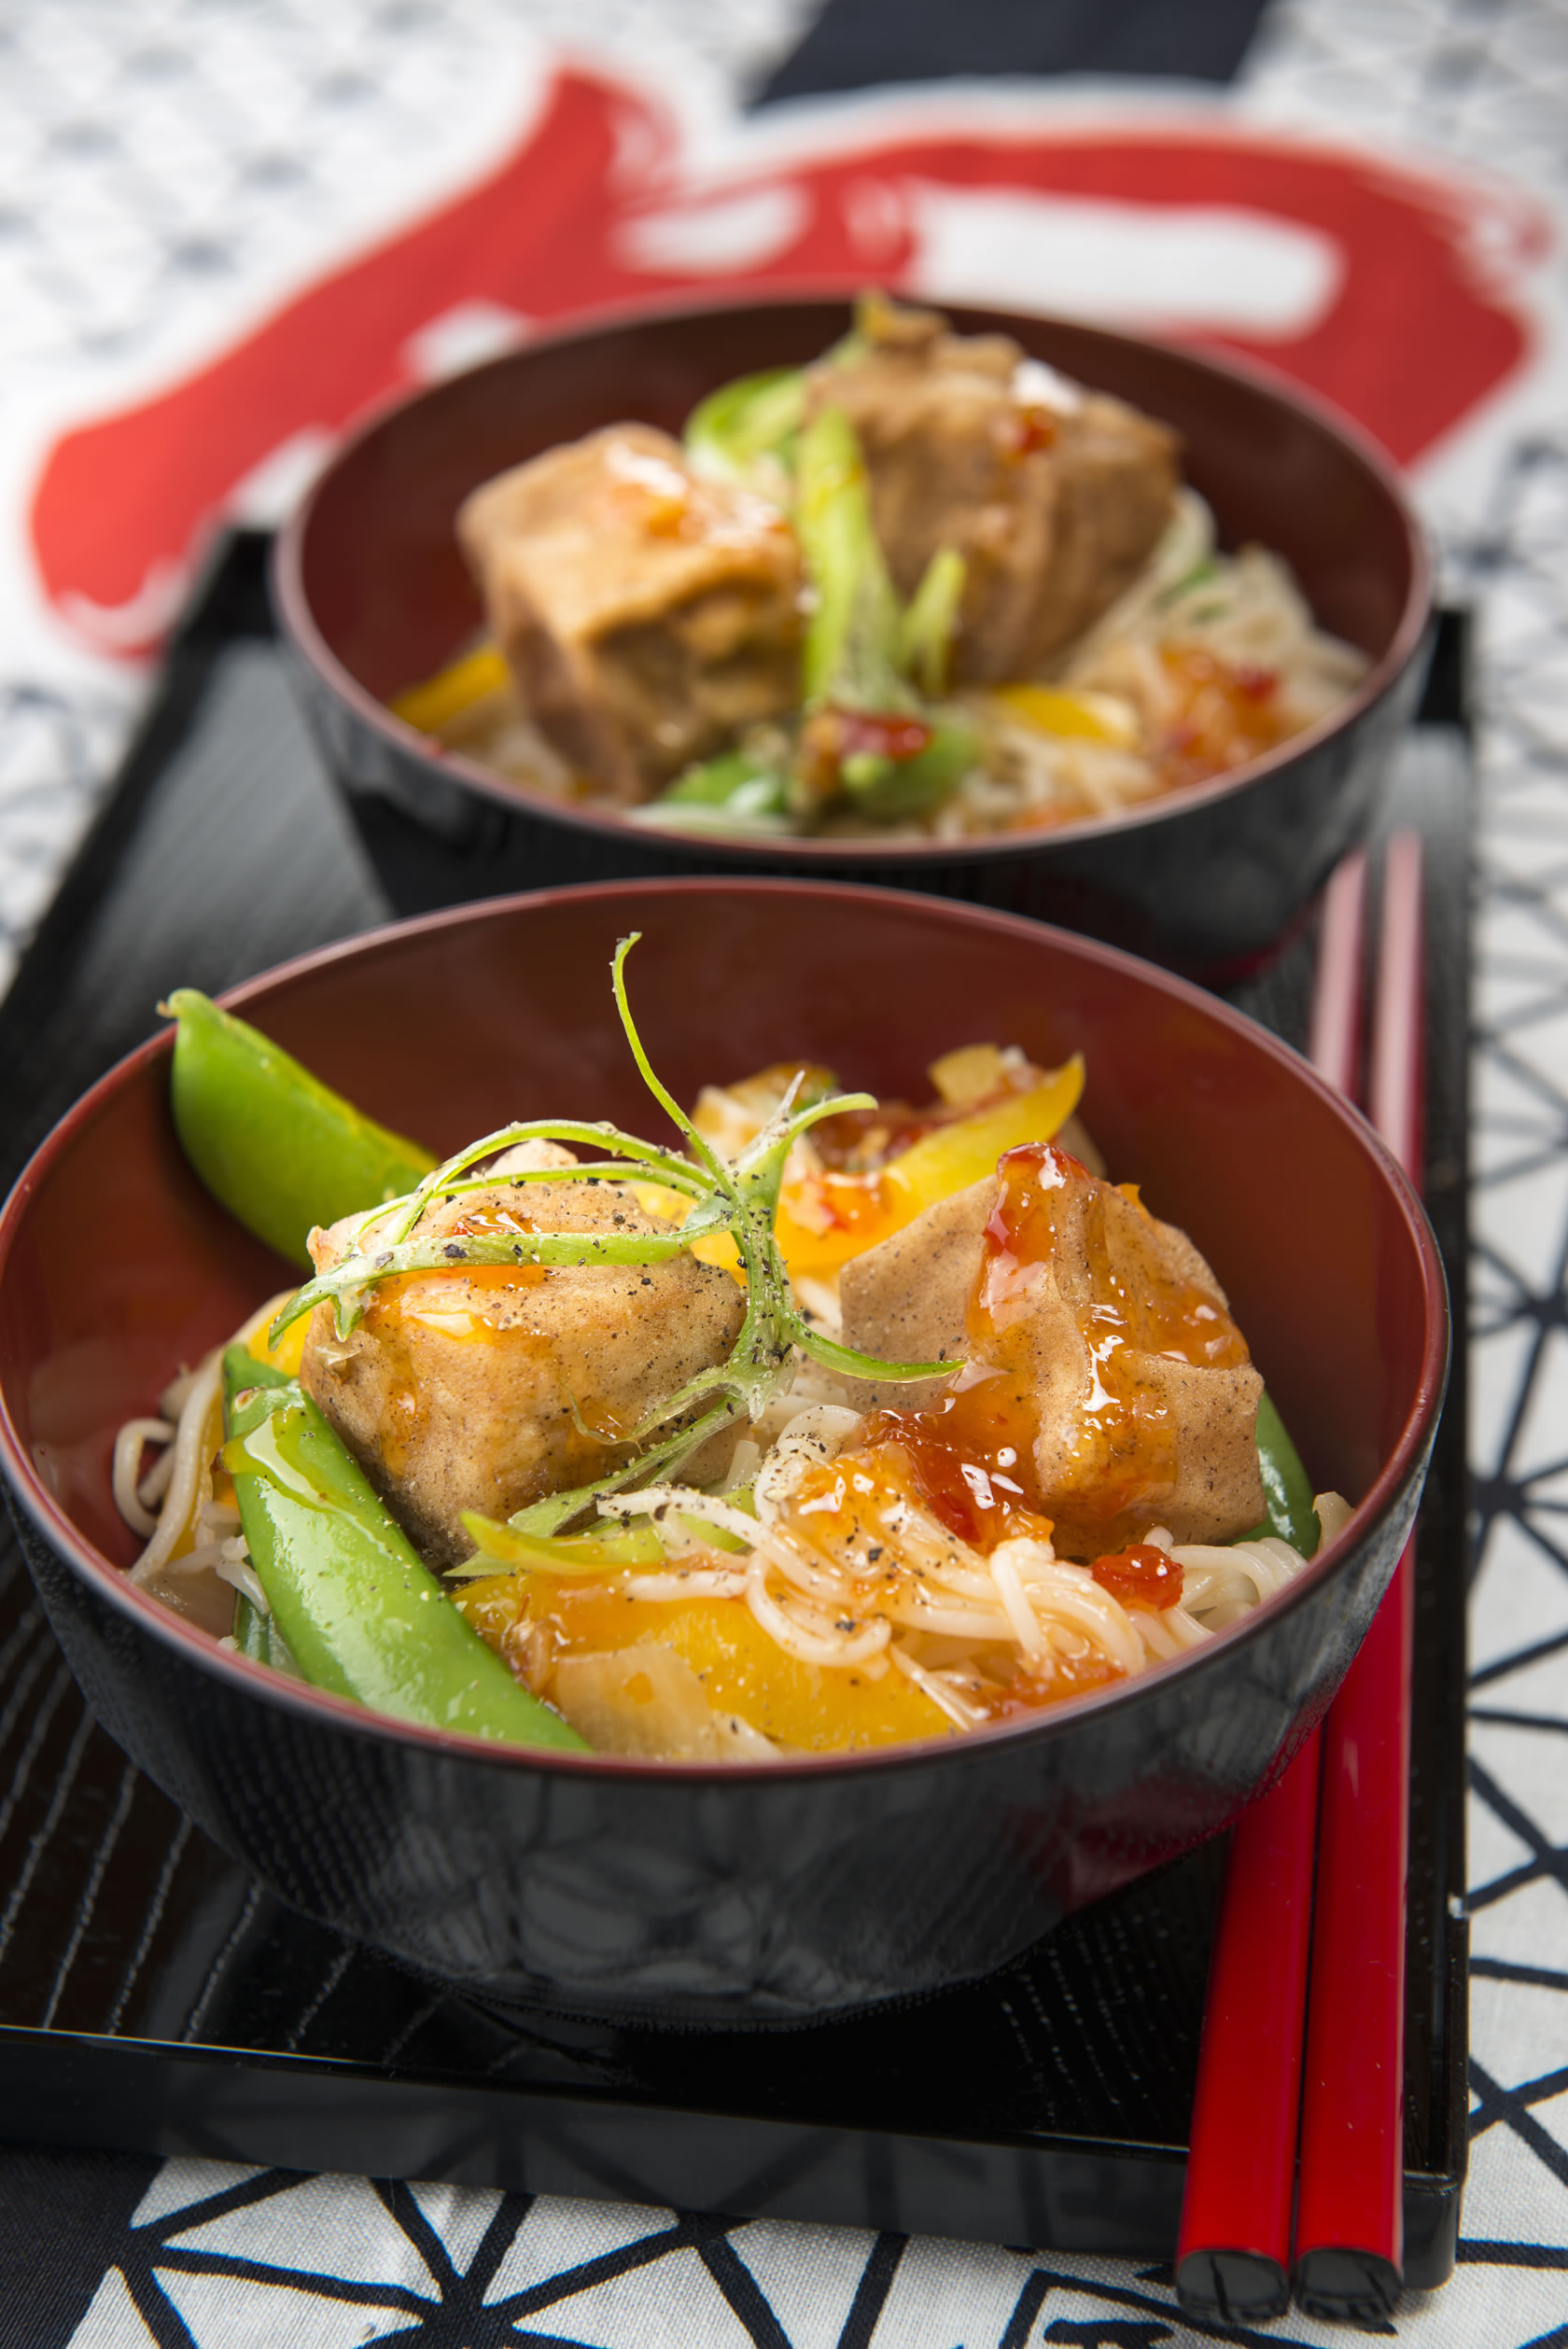 Ramen Noodles with Spiced Tofu and Chilli Lemon Sauce